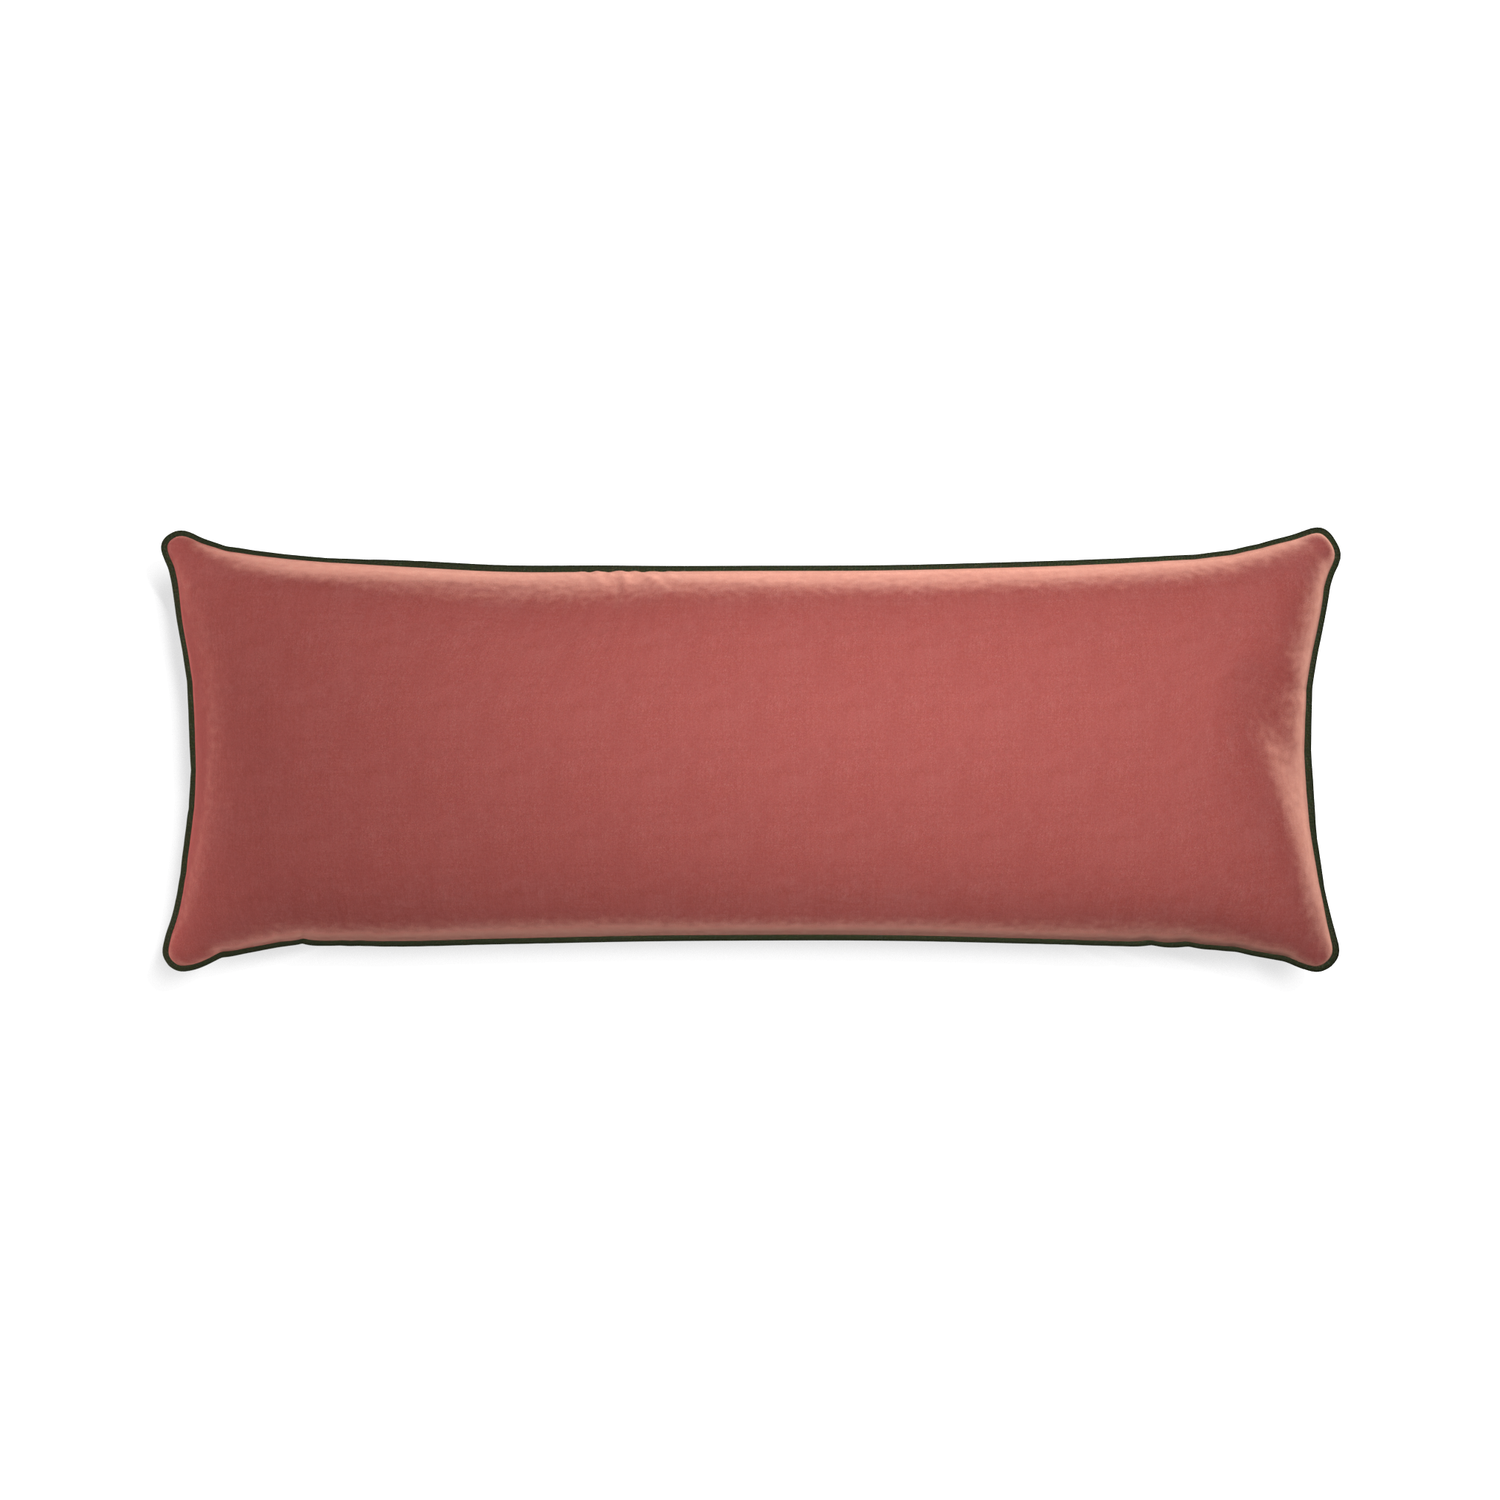 Xl-lumbar cosmo velvet custom coralpillow with f piping on white background